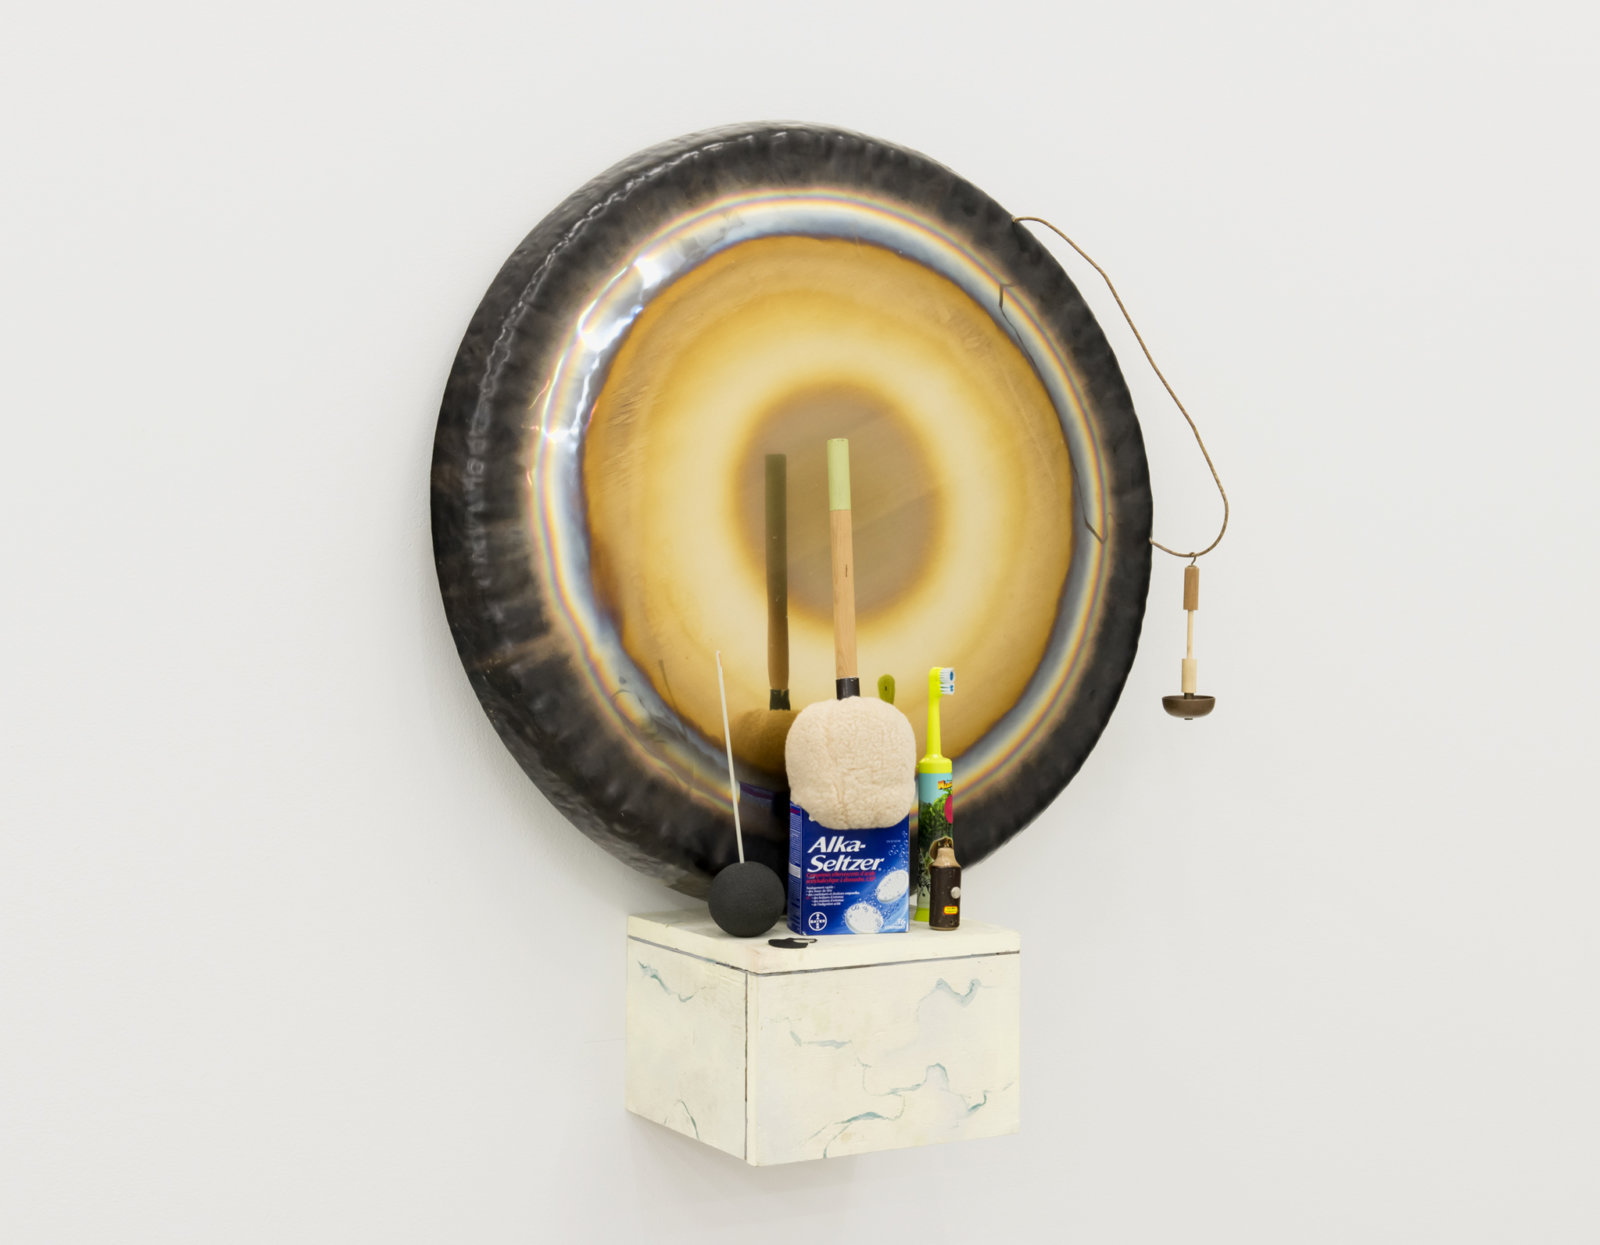 Ashes Withyman, Musca, Altar, Cetus, Compass, Furnas, River, Cup, 2017–2018, gong, alka-seltzer, mallet, animal calls, electric toothbrush, bell, painted plywood, 25 x 32 x 9 in. (64 x 81 x 23 cm)